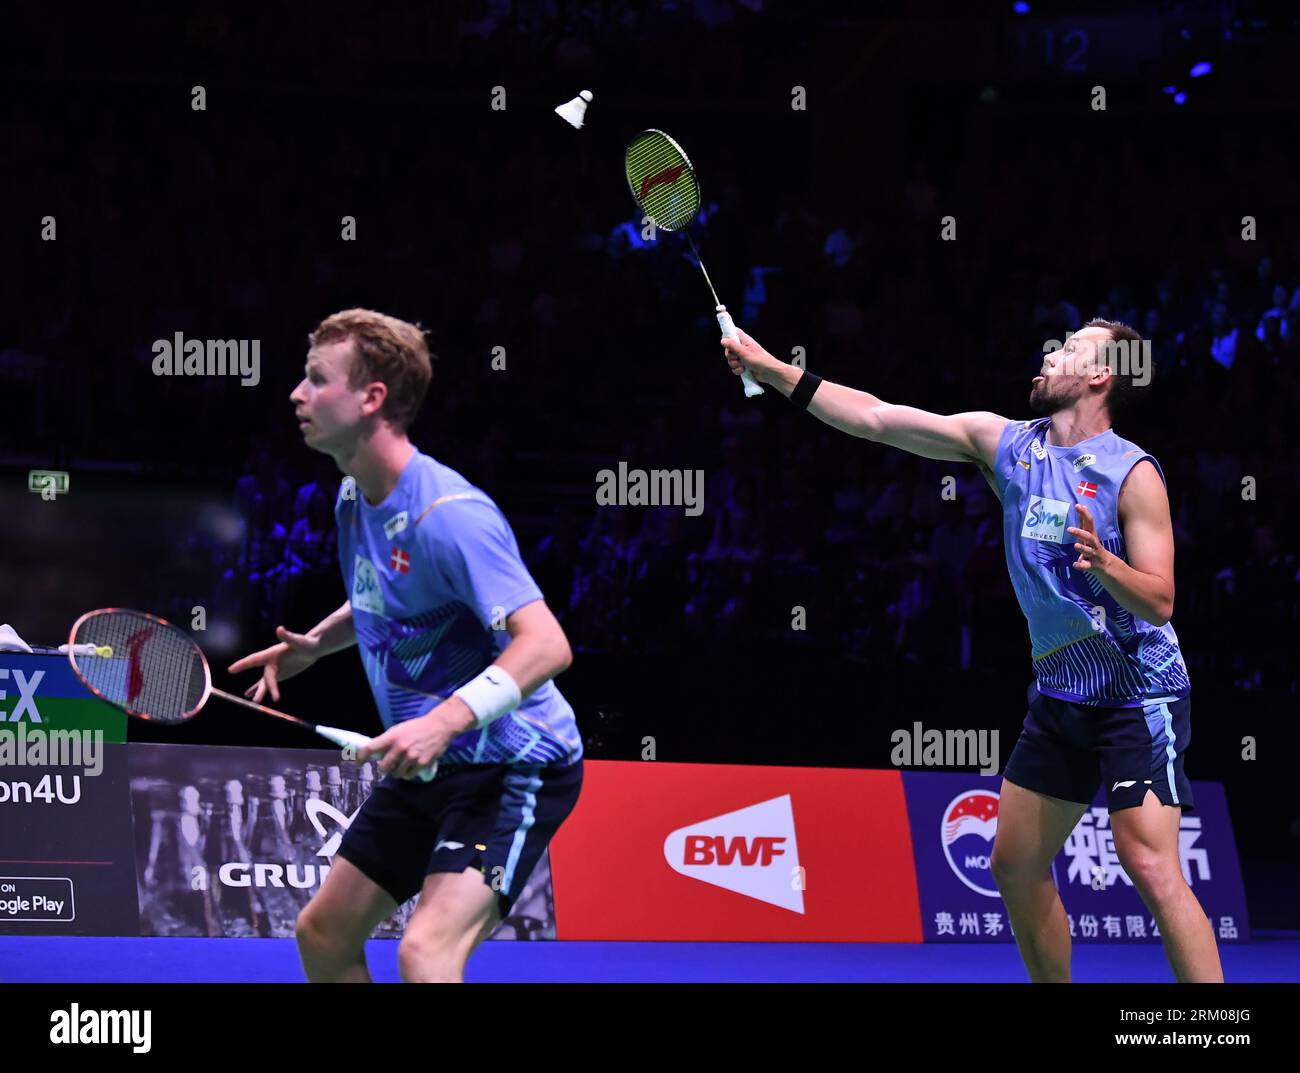 Copenhagen, Denmark. 26th Aug, 2023. Kim Astrup/Anders Skaarup Rasmussen (R) of Denmark compete during the men's doubles semifinal match against Liang Weikeng/Wang Chang of China at the BWF World Championships 2023 in Copenhagen, Denmark, Aug. 26, 2023. Credit: Ren Pengfei/Xinhua/Alamy Live News Stock Photo